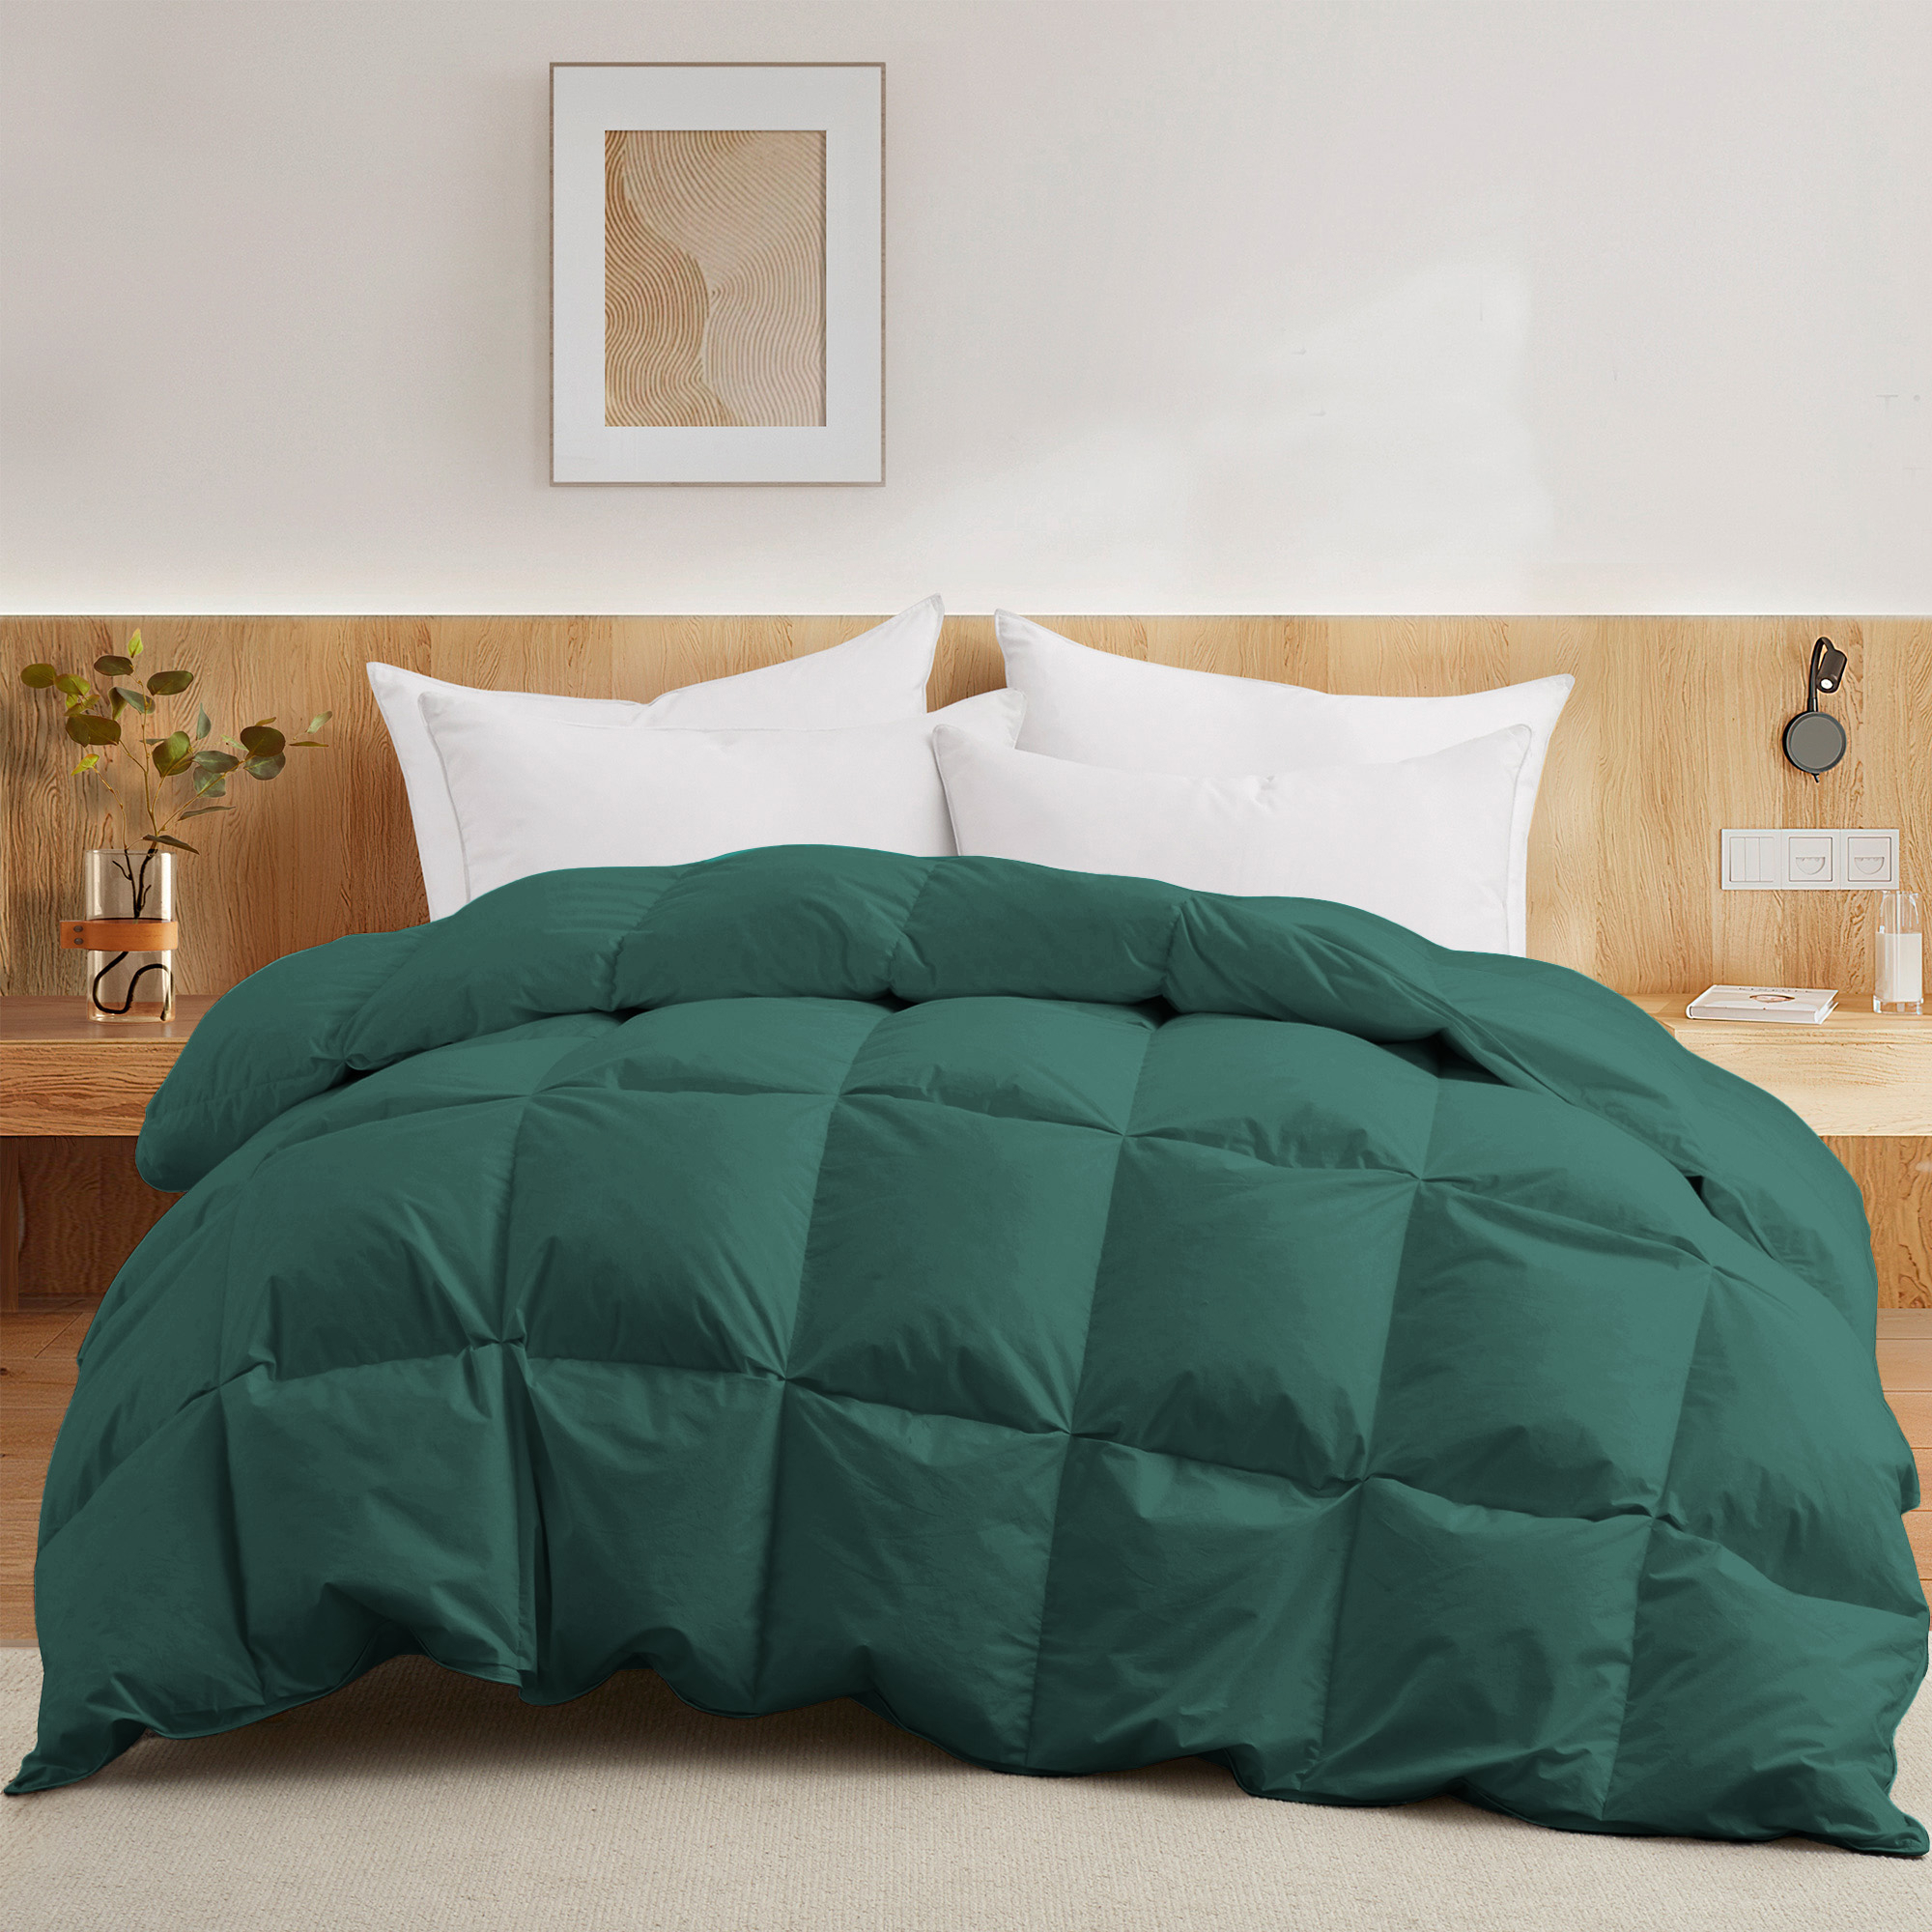 Premium Goose Feather And Down Duvet Insert -All Season Comforter With Breathable Cotton Cover - Full/Queen-90*90